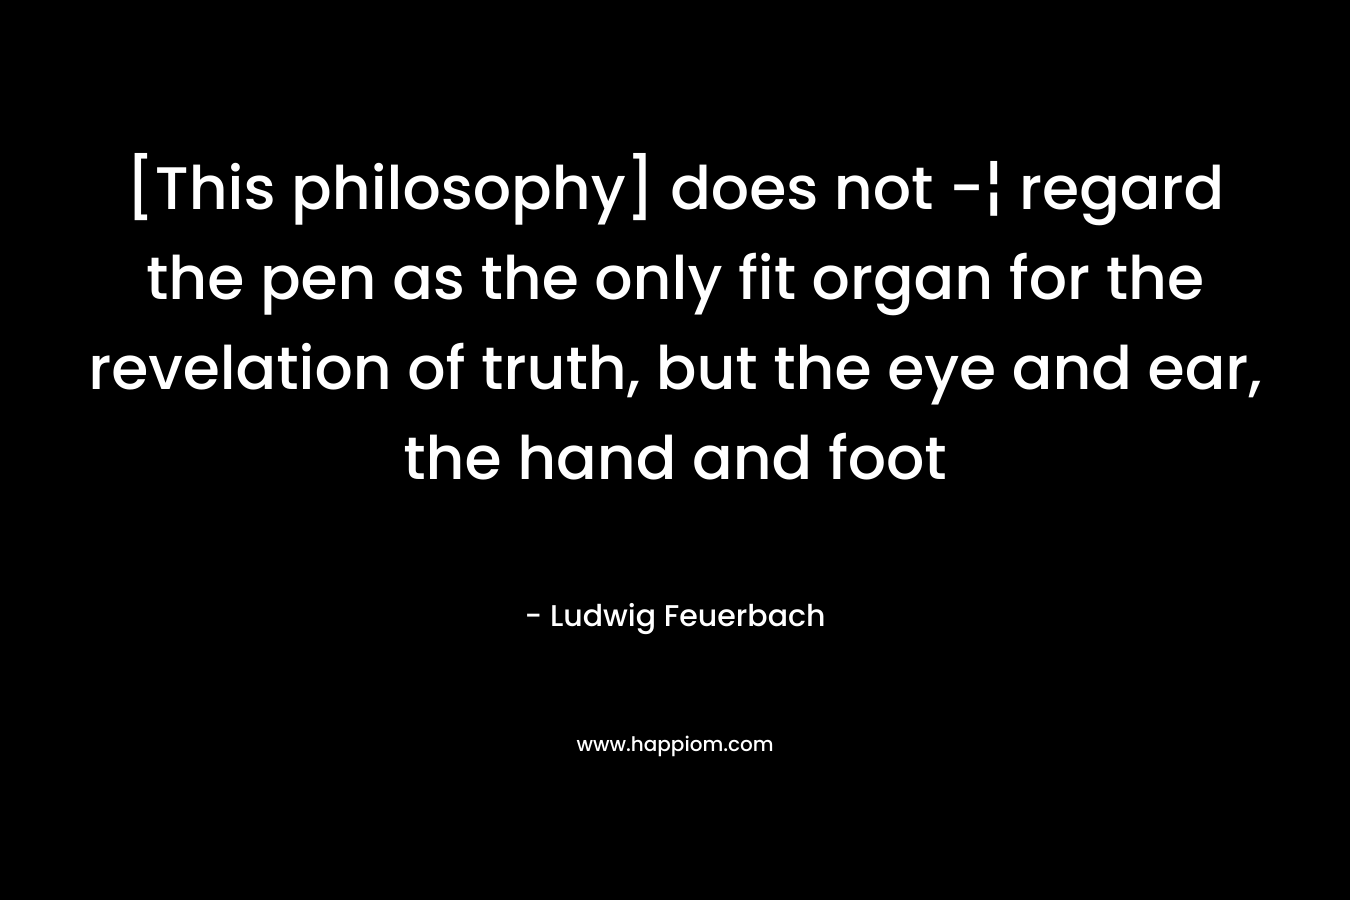 [This philosophy] does not -¦ regard the pen as the only fit organ for the revelation of truth, but the eye and ear, the hand and foot